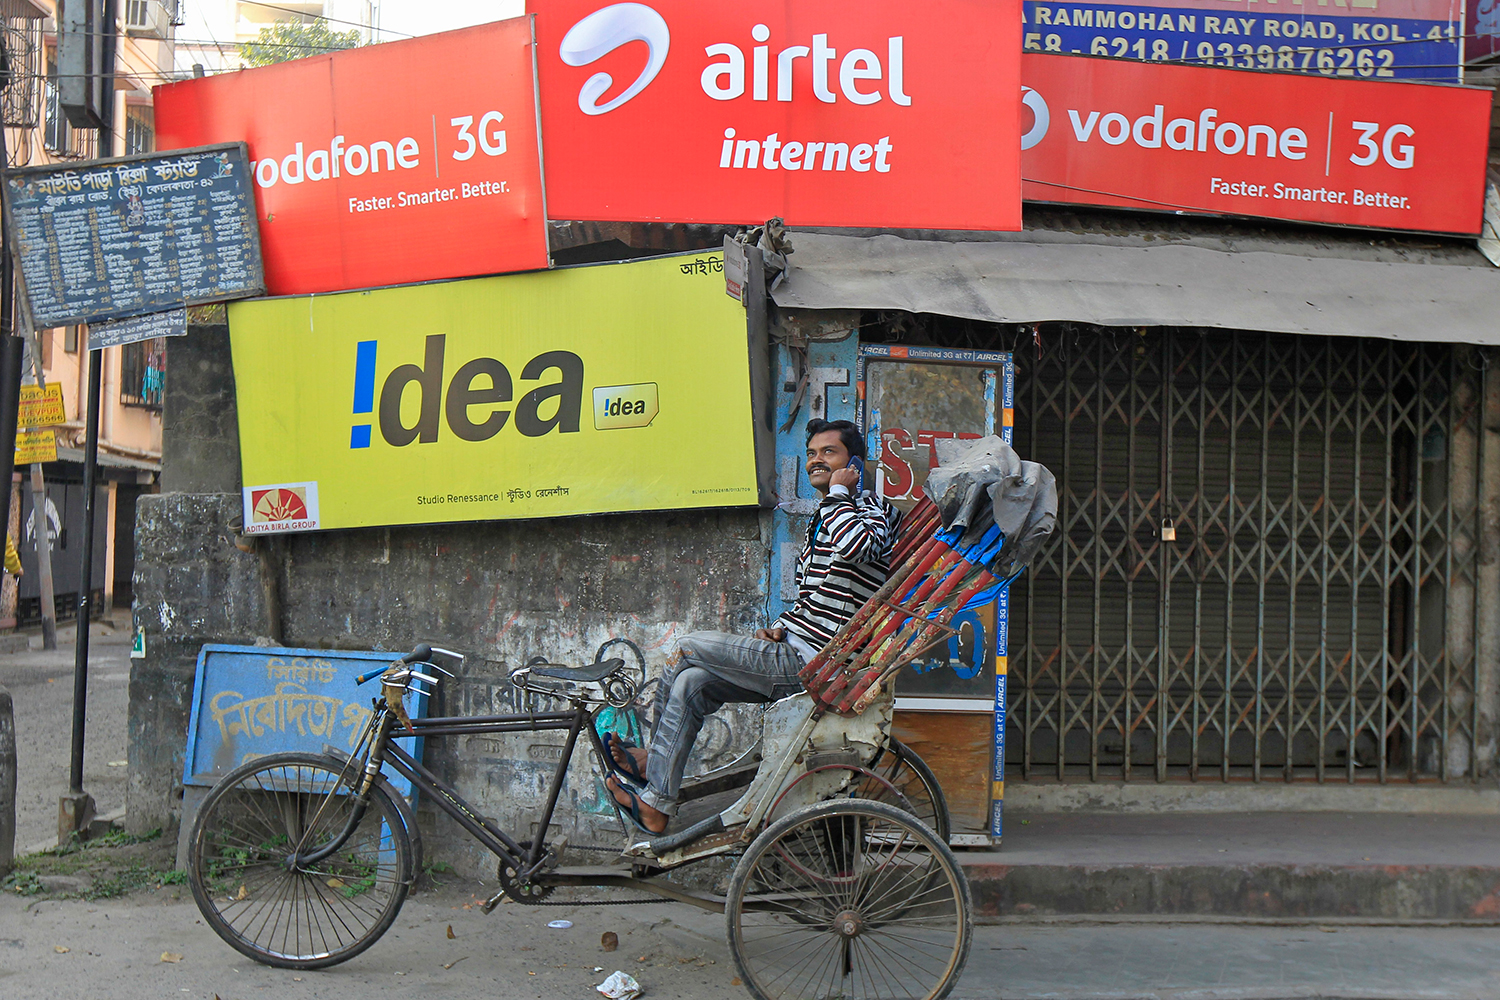 The number of Internet users in India shoots up and reaches the U.S.